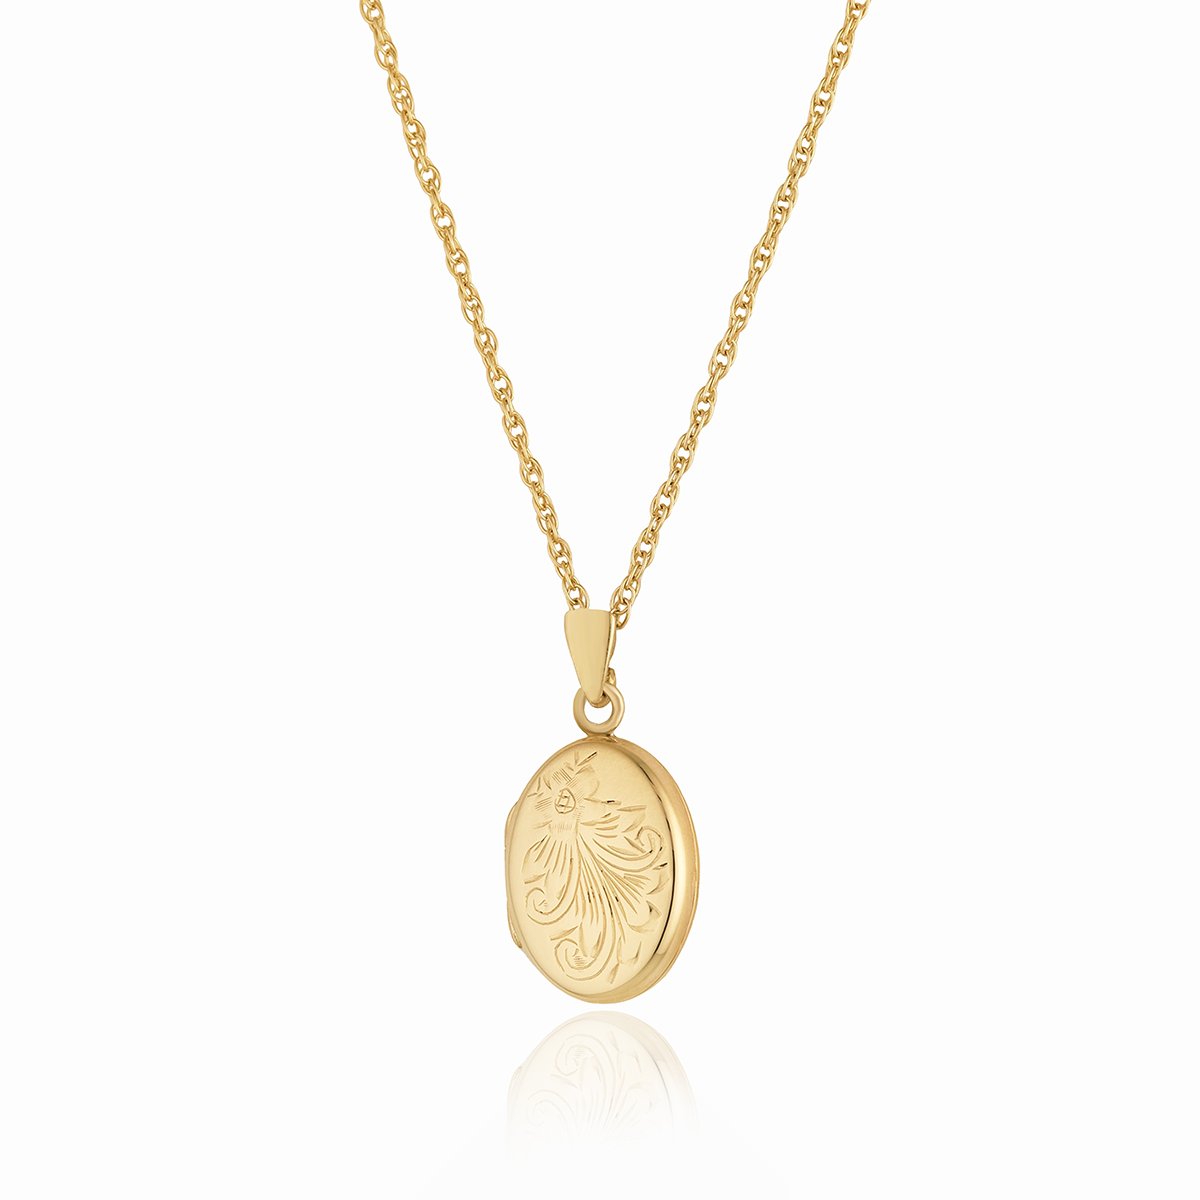 Petite 9 ct gold oval locket with a floral engraving on a 9 ct gold rope chain